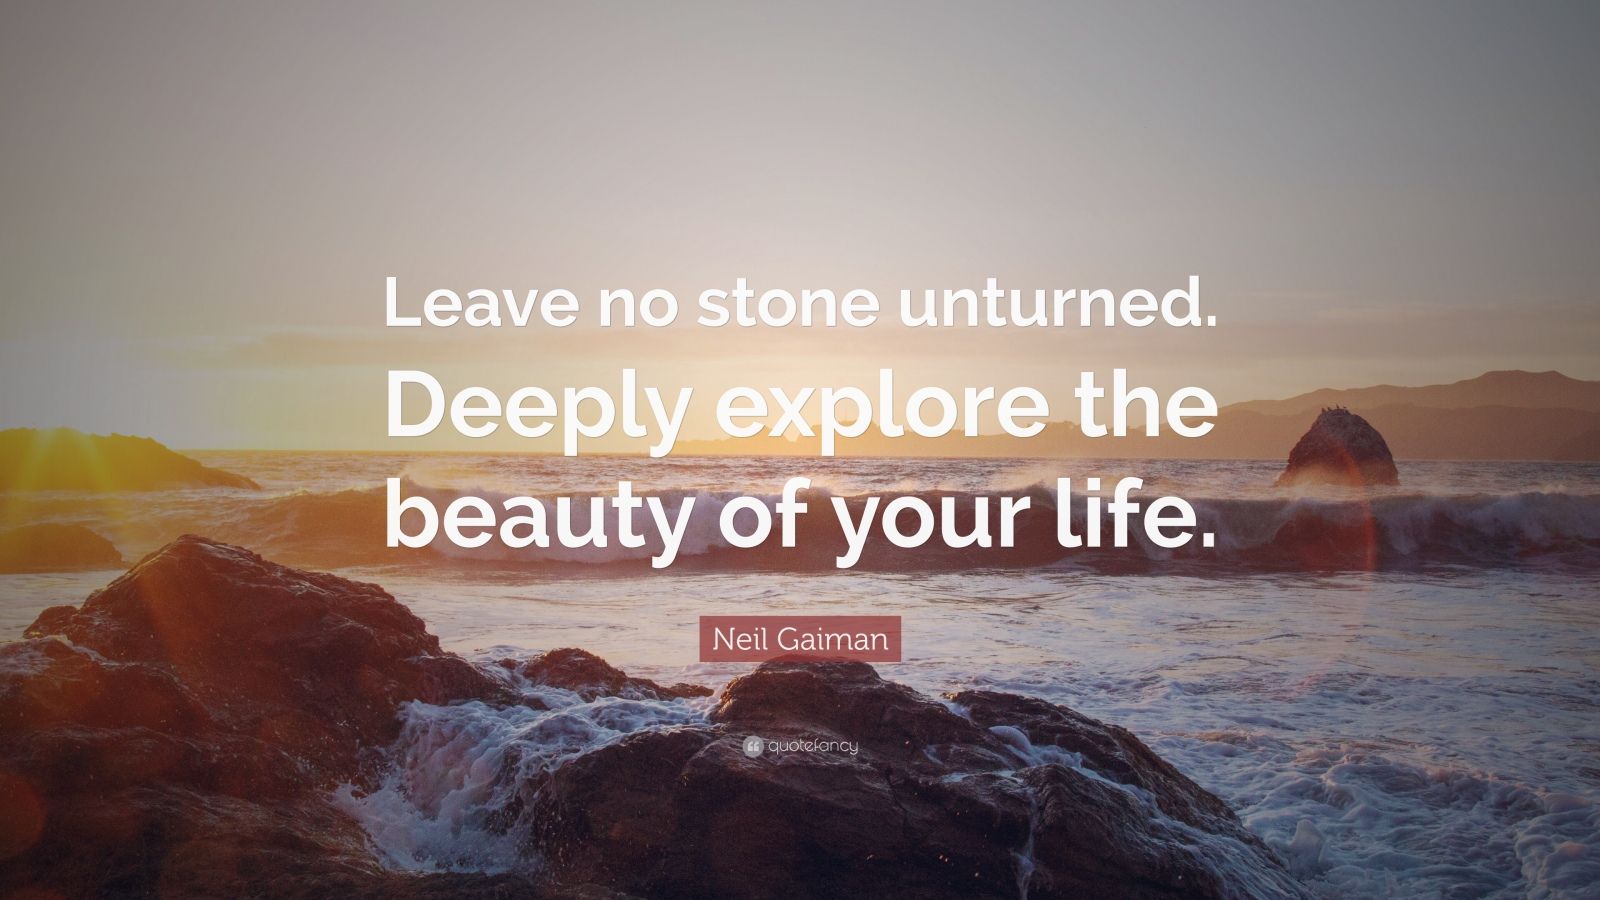 Neil Gaiman Quote: "Leave no stone unturned. Deeply ...